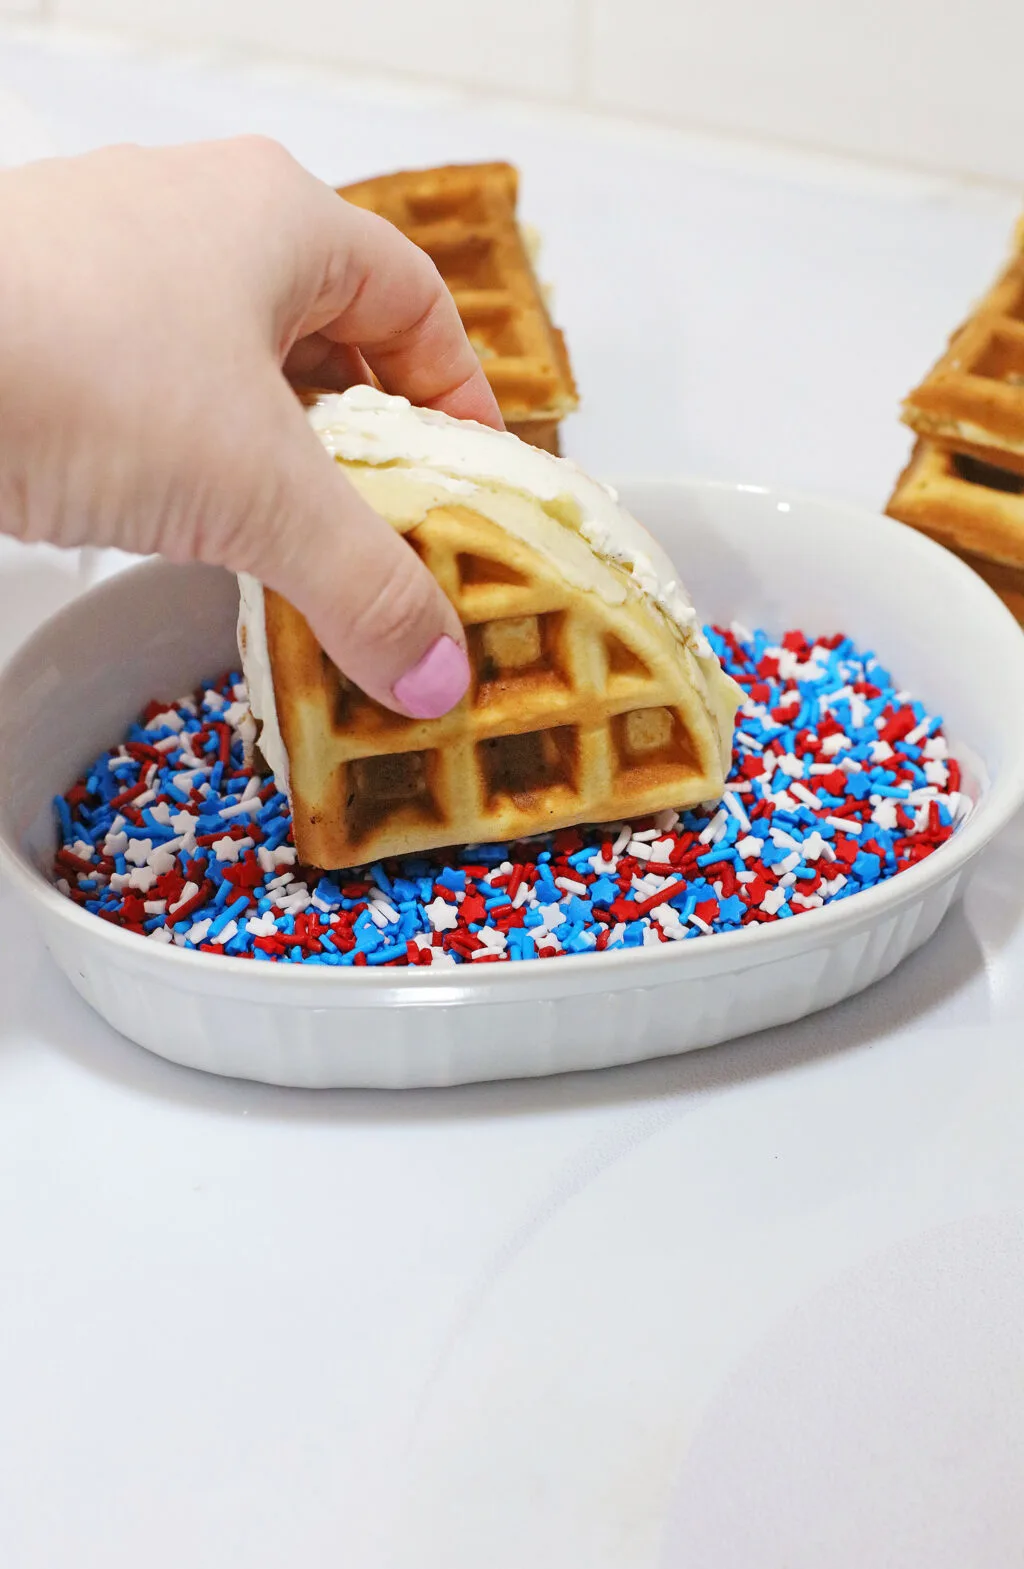 dipping edges of ice cream sandwich into sprinkles